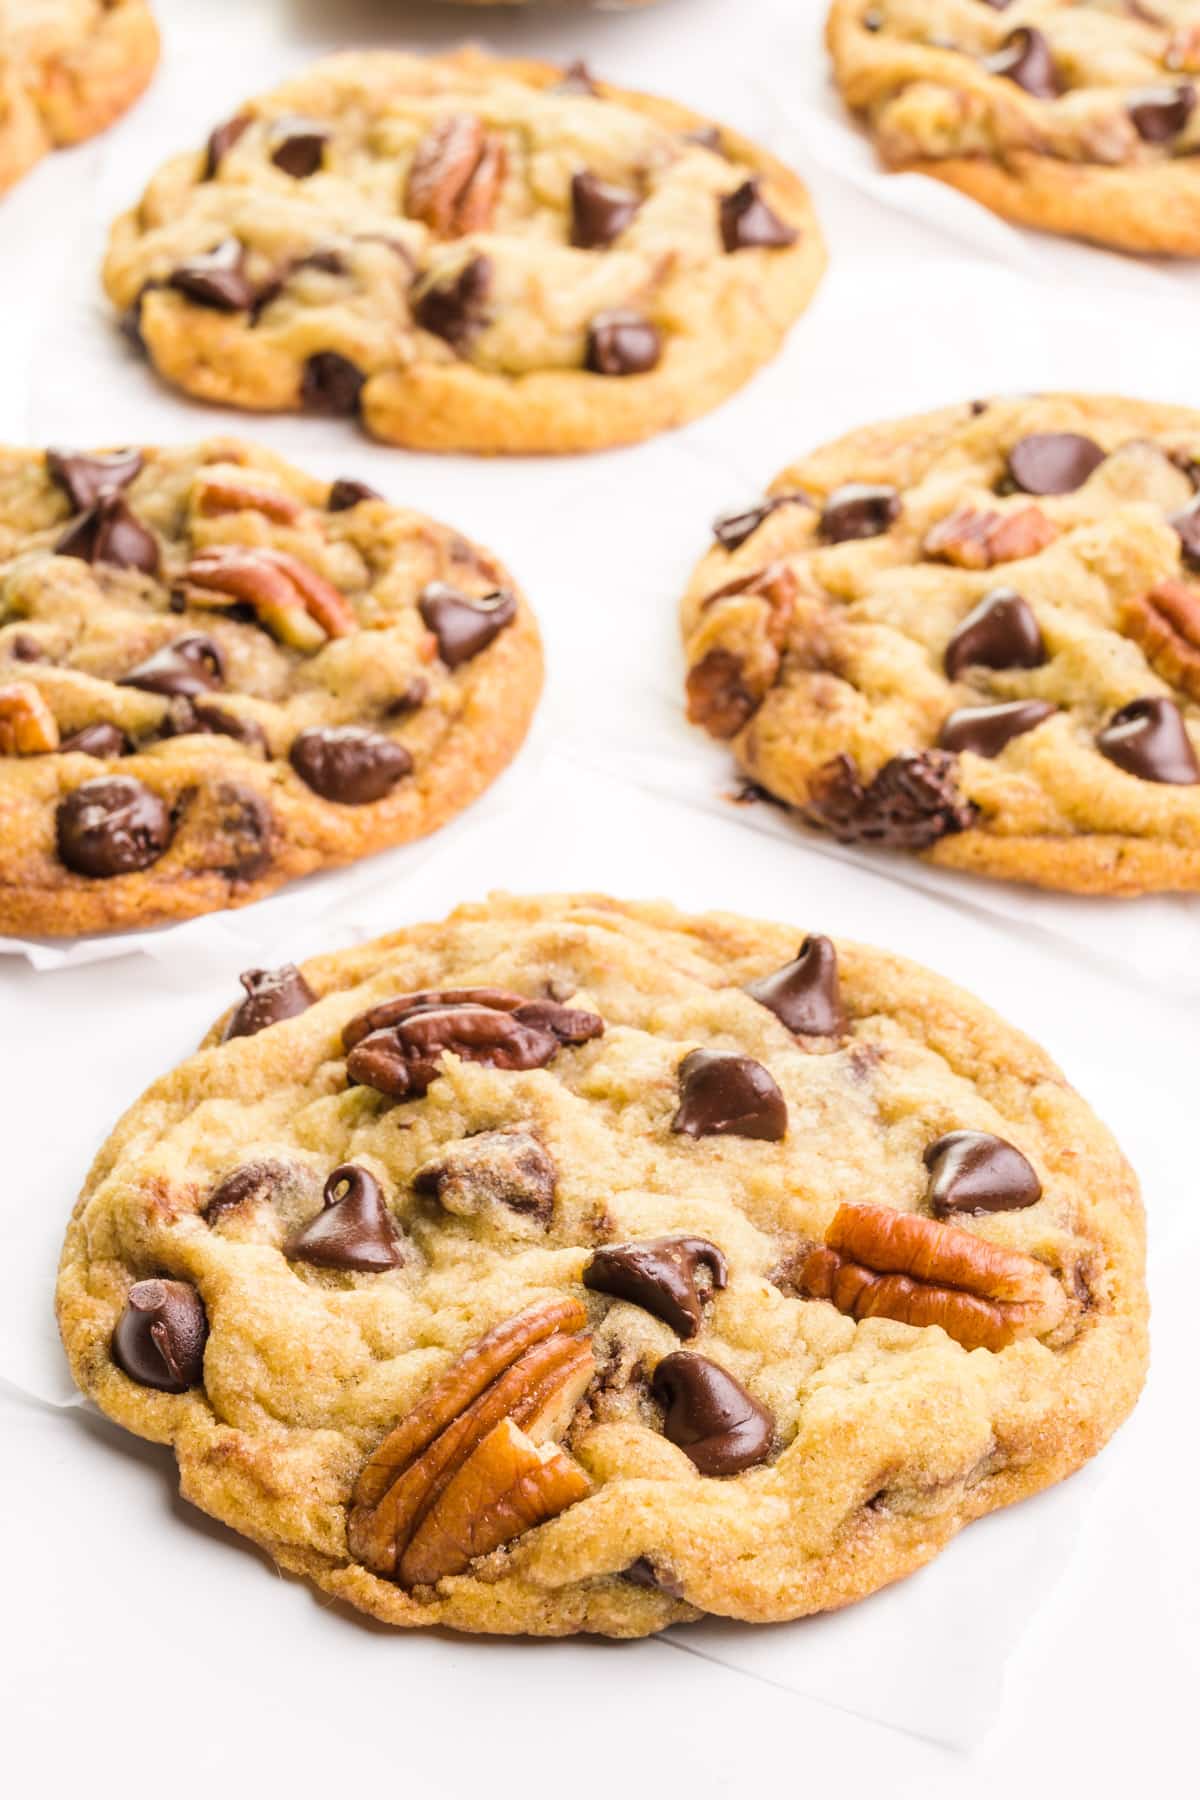 Chocolate chip pecan cookies are placed on a white table.